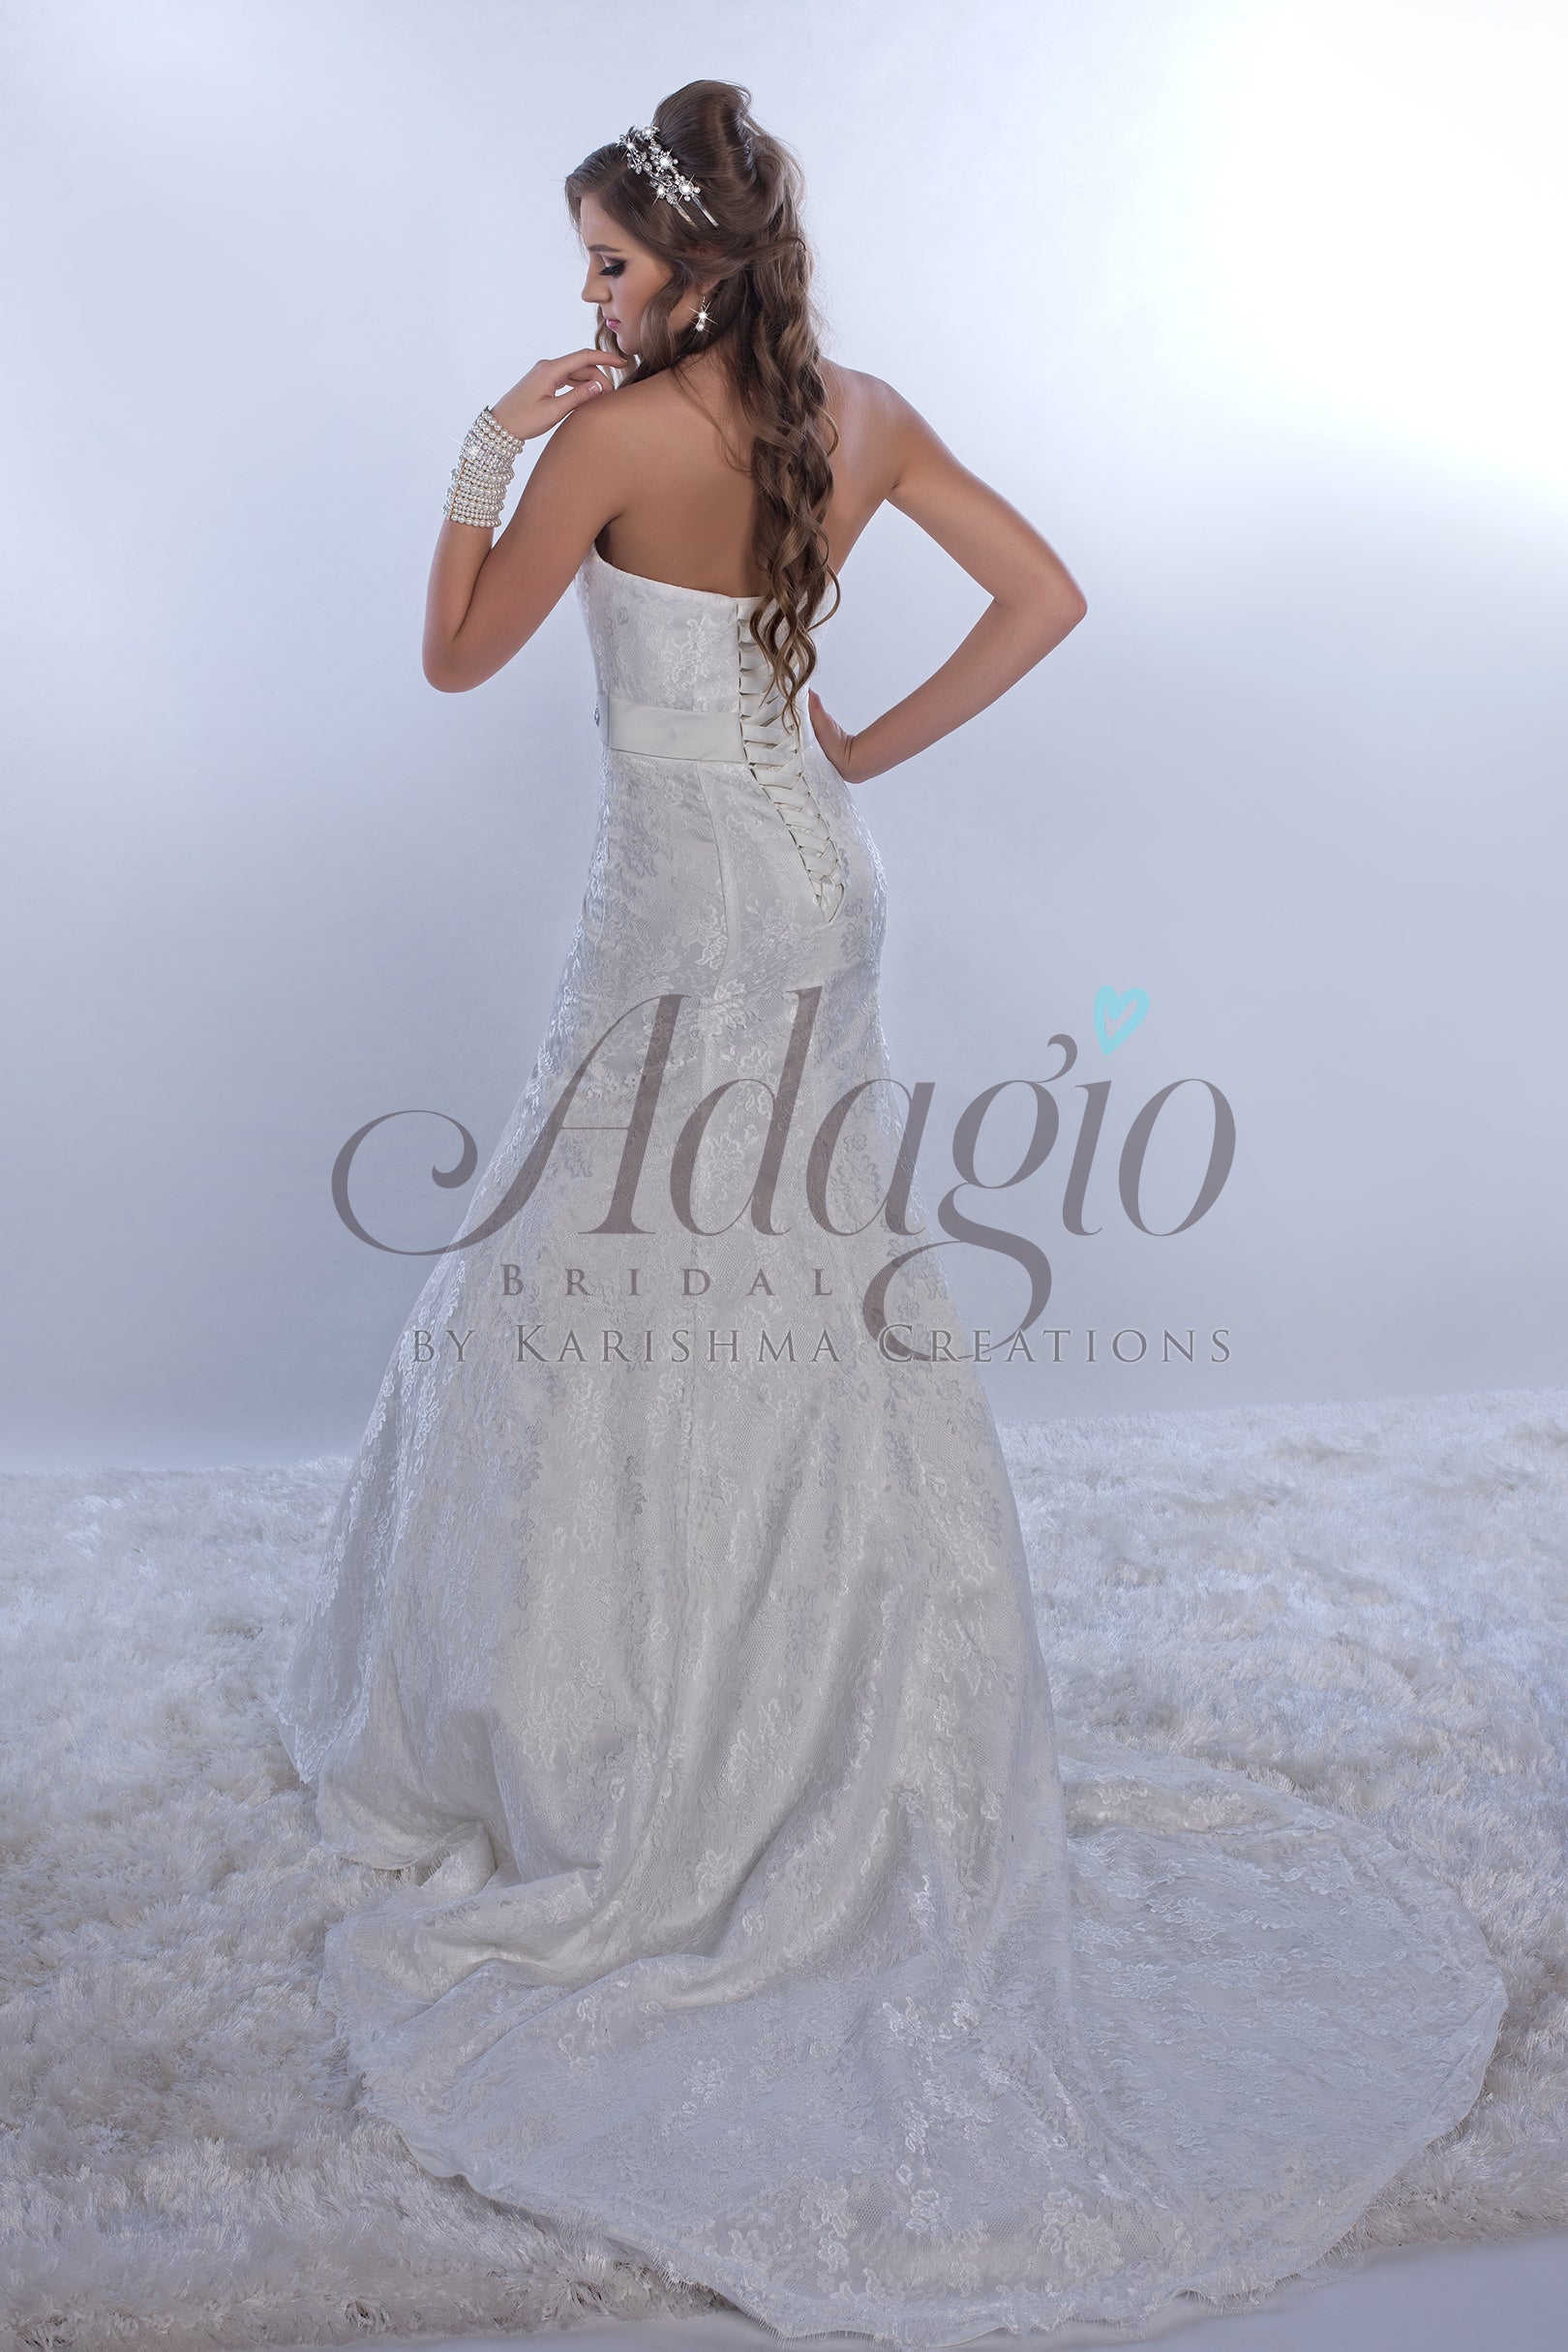 in Stock Adagio Bridal 9149 Size 14 Wedding Dress Long Lace Fit & Flare Corset Crystal Belt